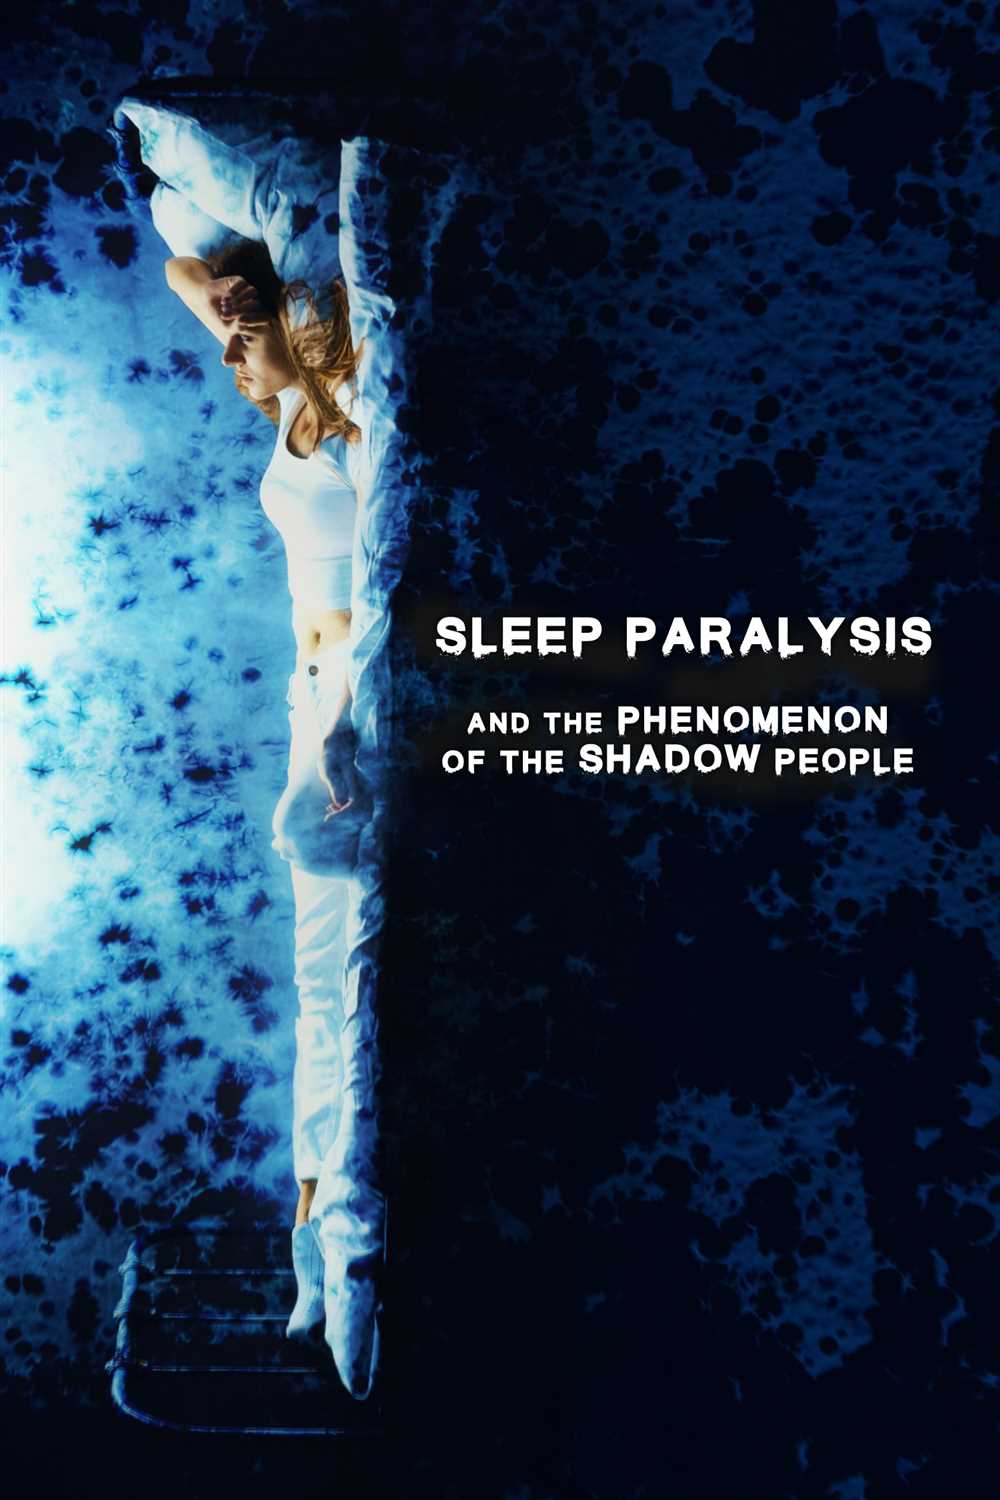 The Link between Sleep Paralysis and Lucid Dreaming